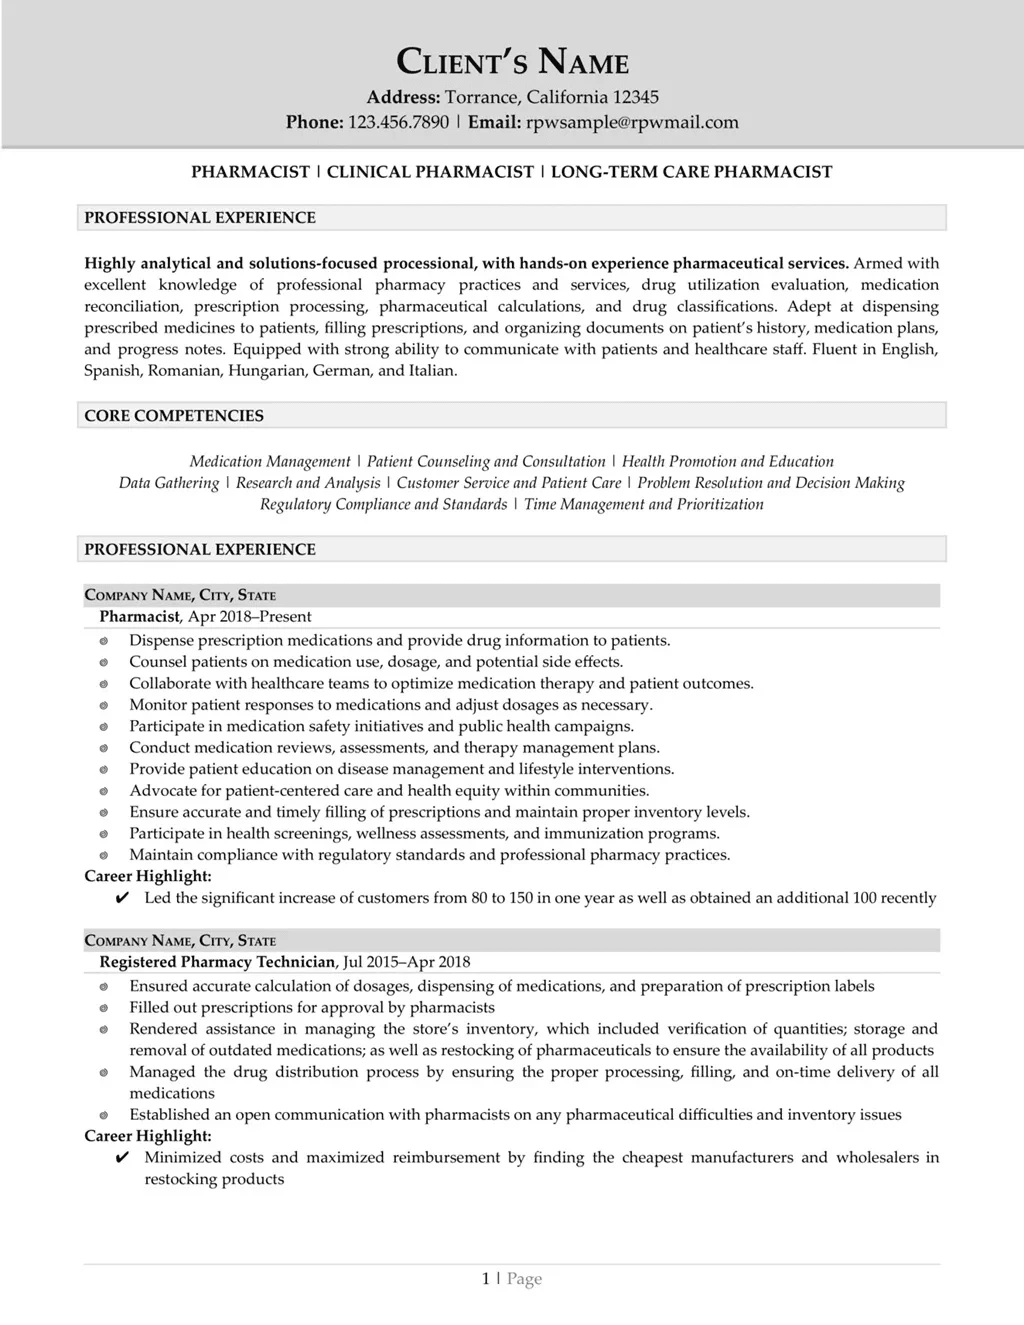 Pharmacist Resume Example Page One